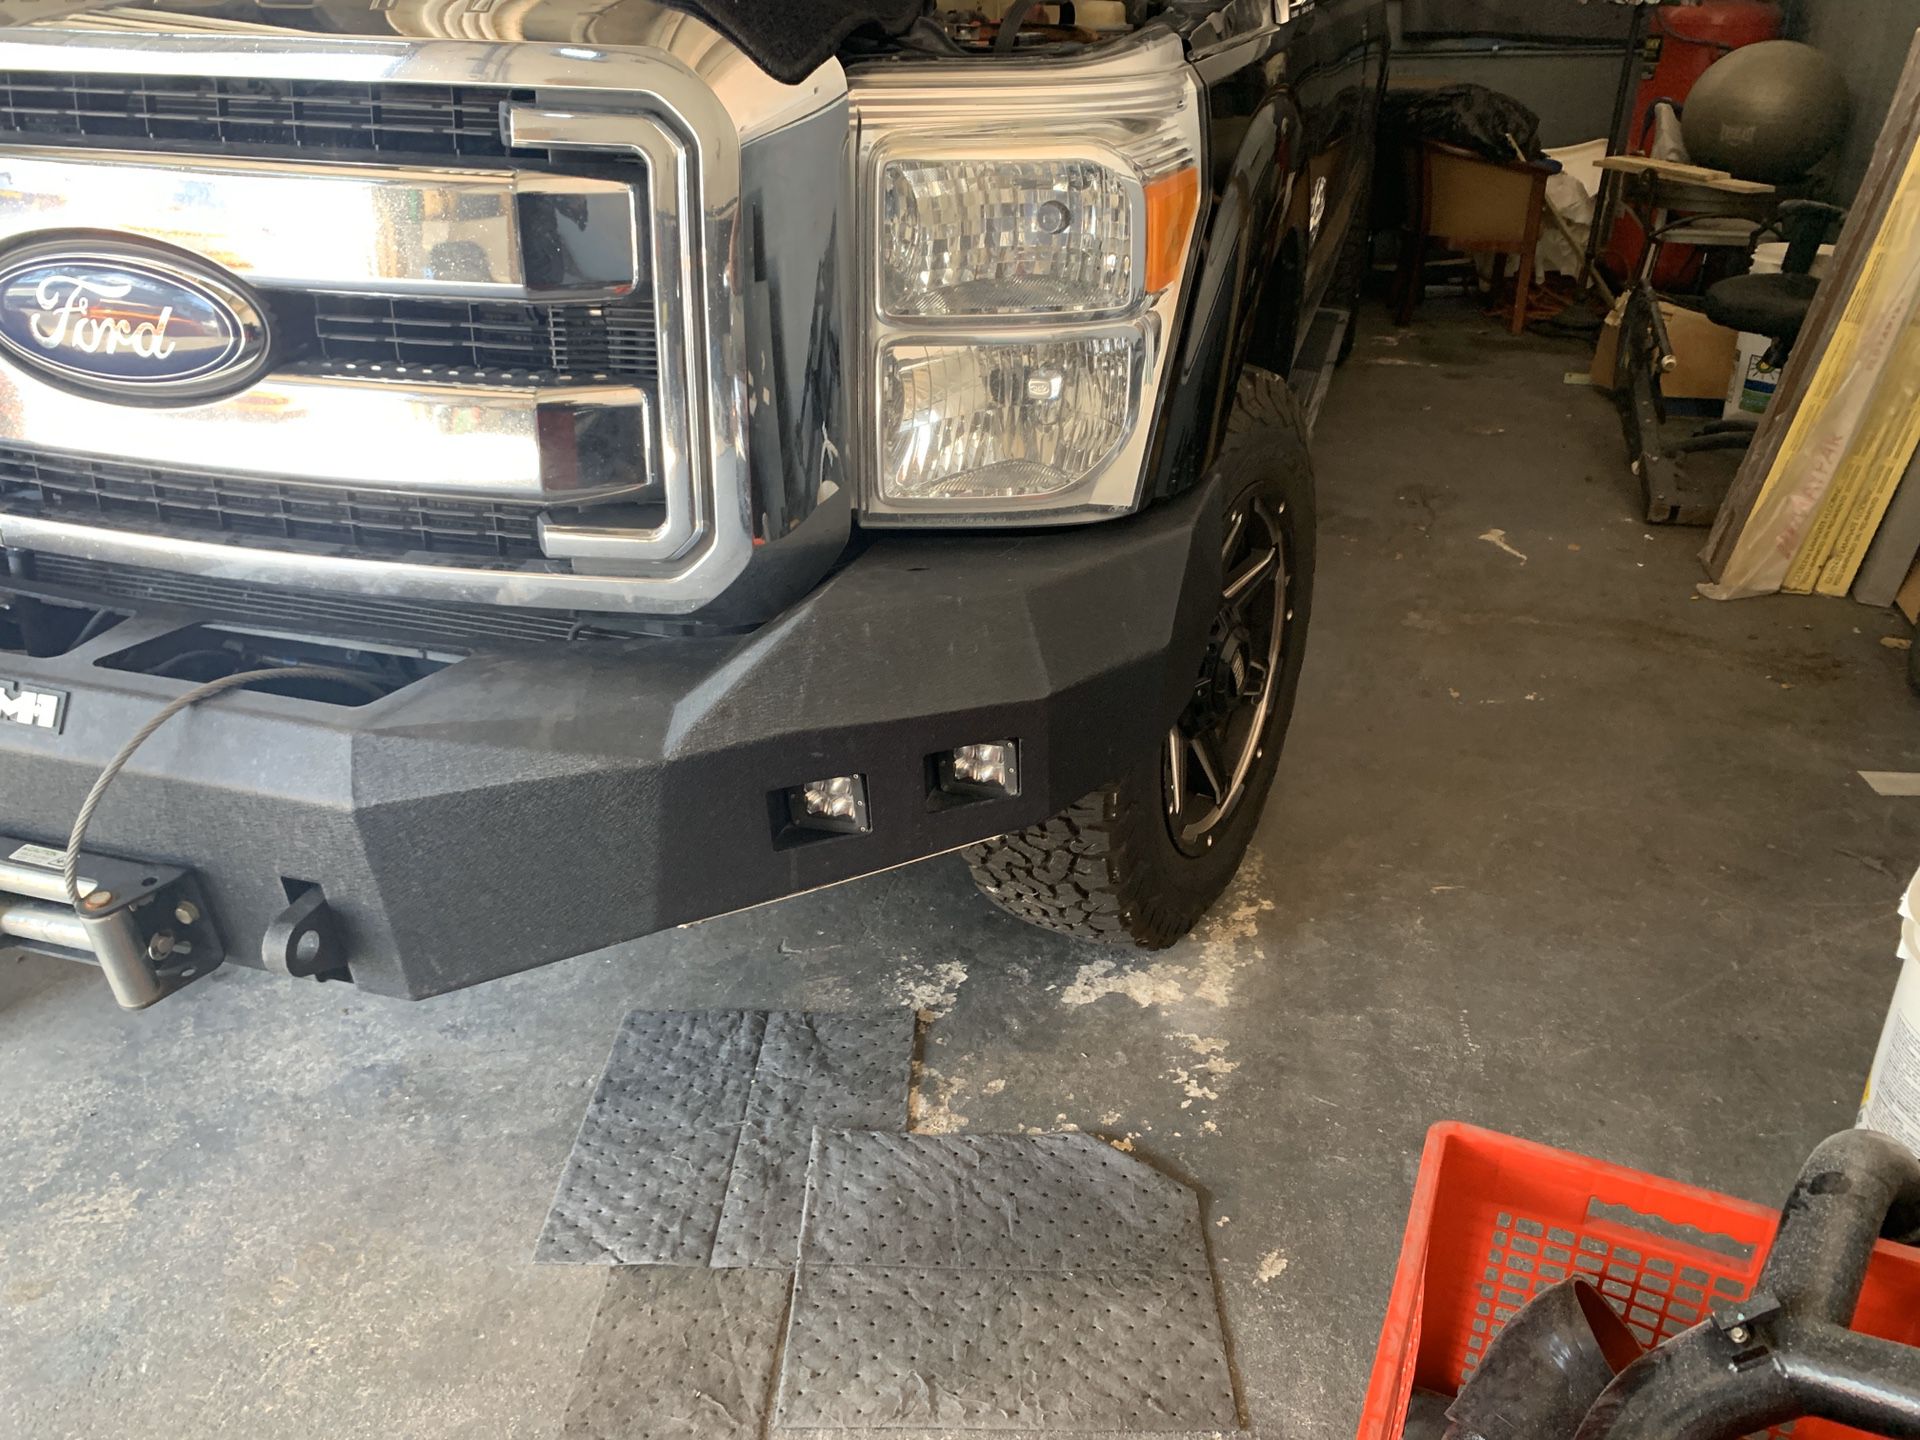 Ford front bumper smittybuilt m1 w/ plates ,led’s and smittybuilt winch